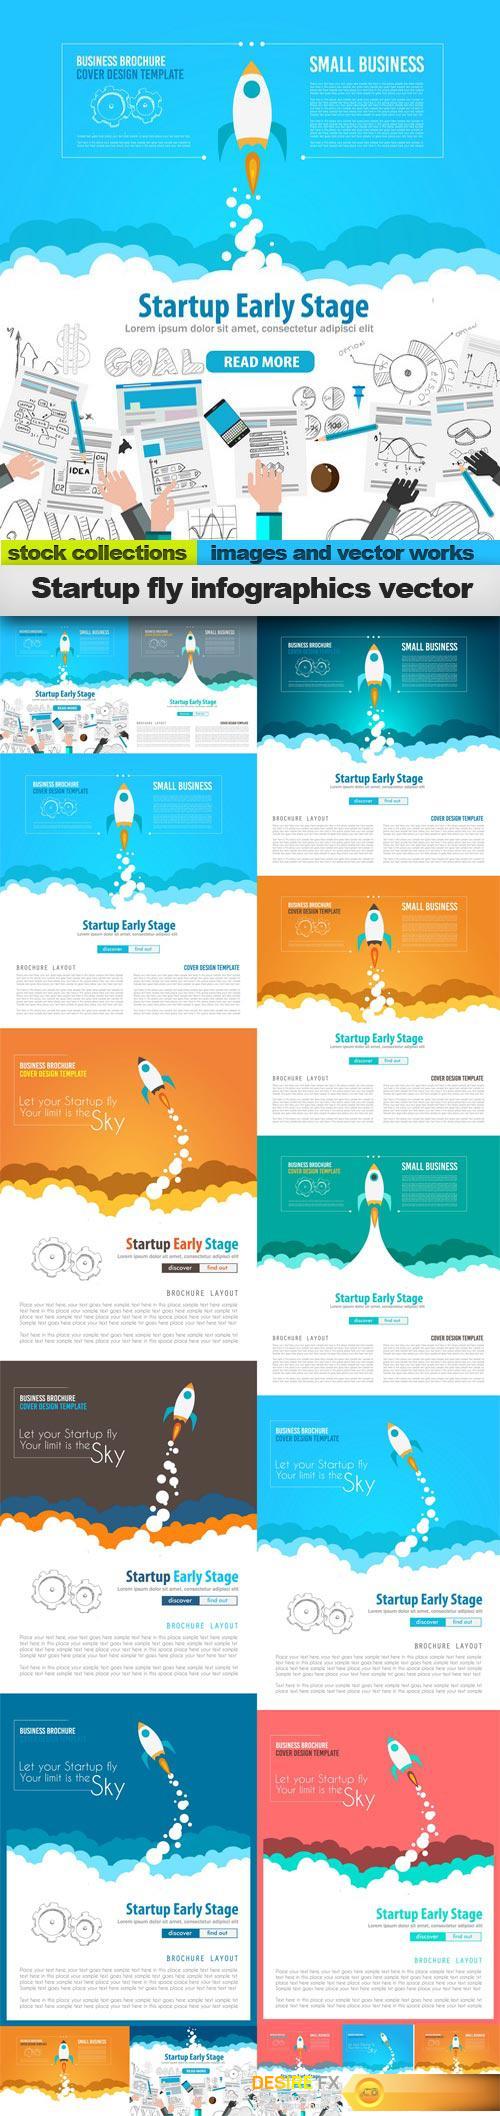 Startup fly infographics vector, 15 x EPS